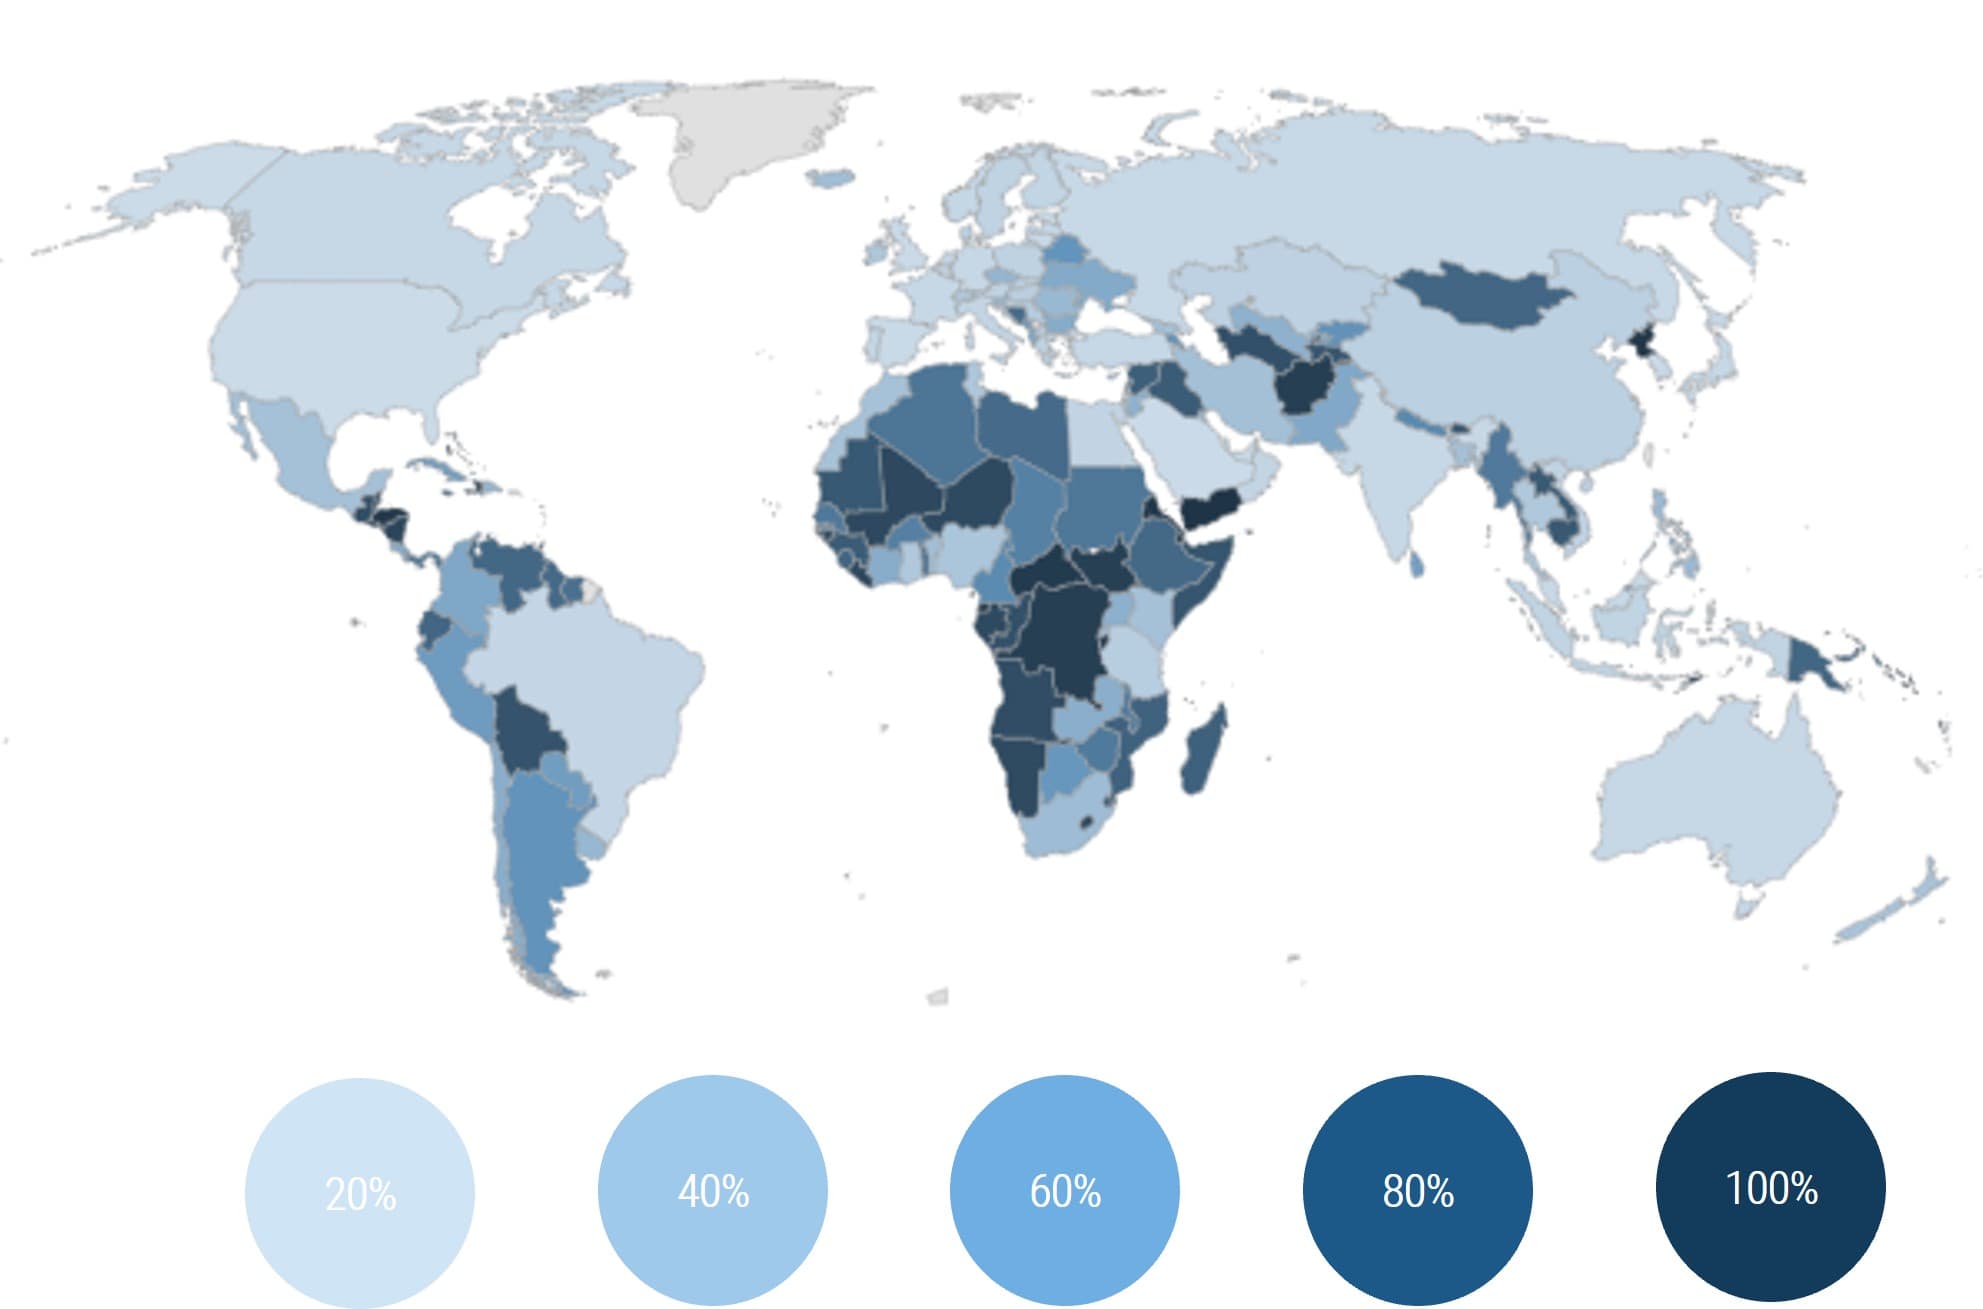 The image contains a picture of the world map that has certain areas of the map highlighted in various shades of blue based on scores in relation to the Global Security Index.